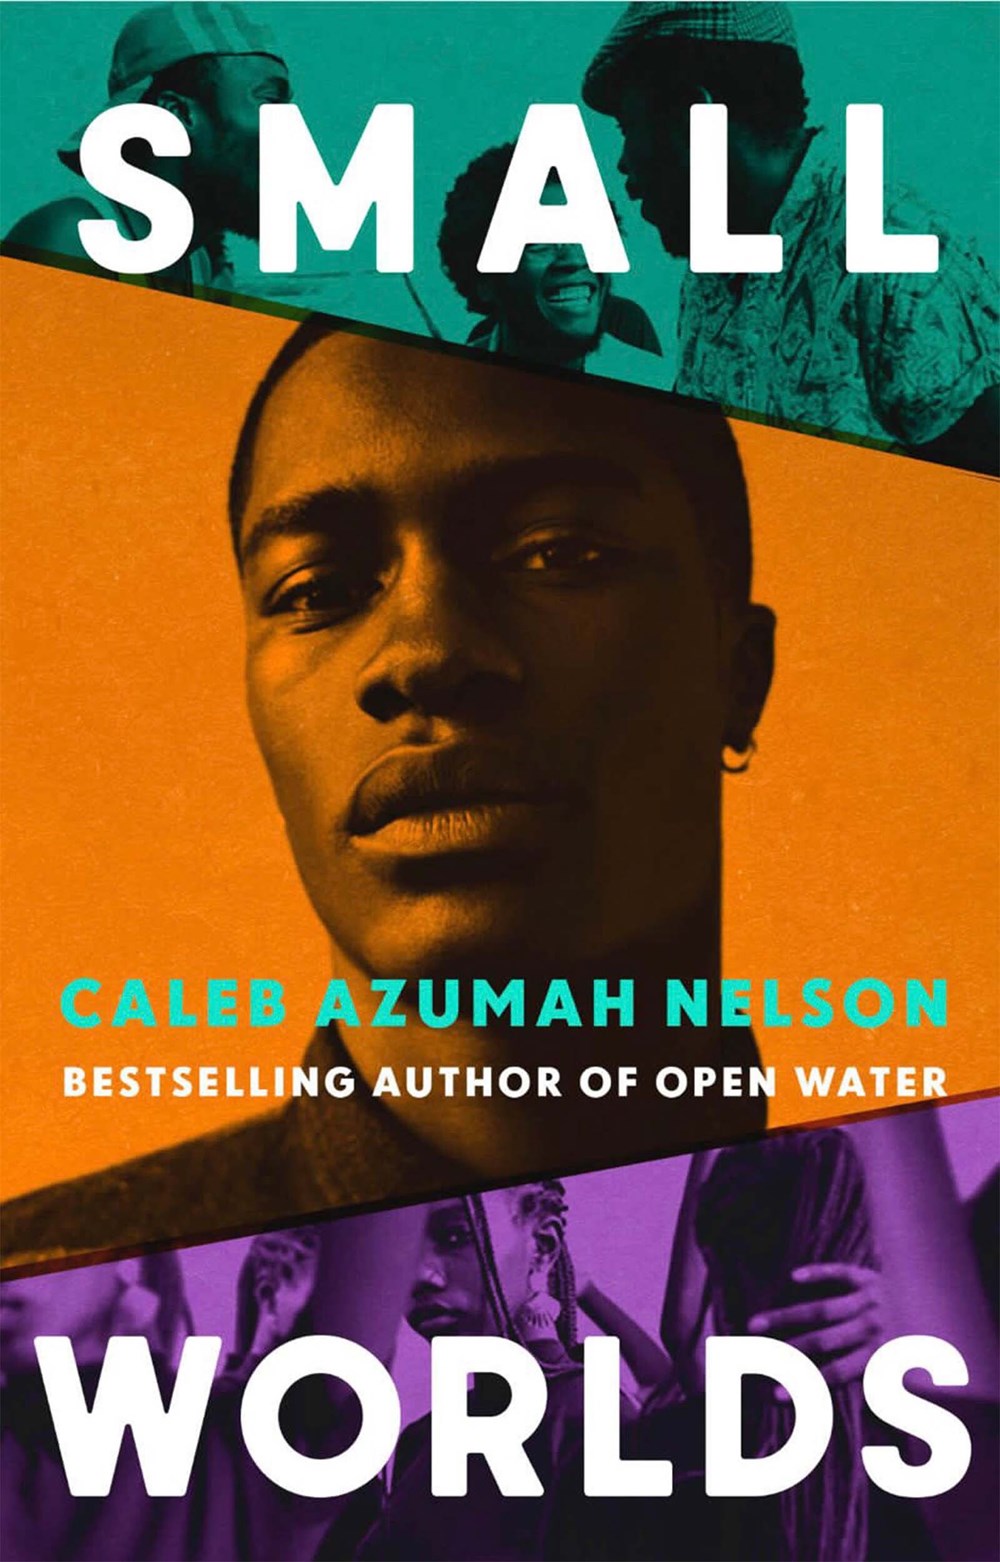 Small Worlds by Caleb Azumah Nelson (Hardcover) (PREORDER)